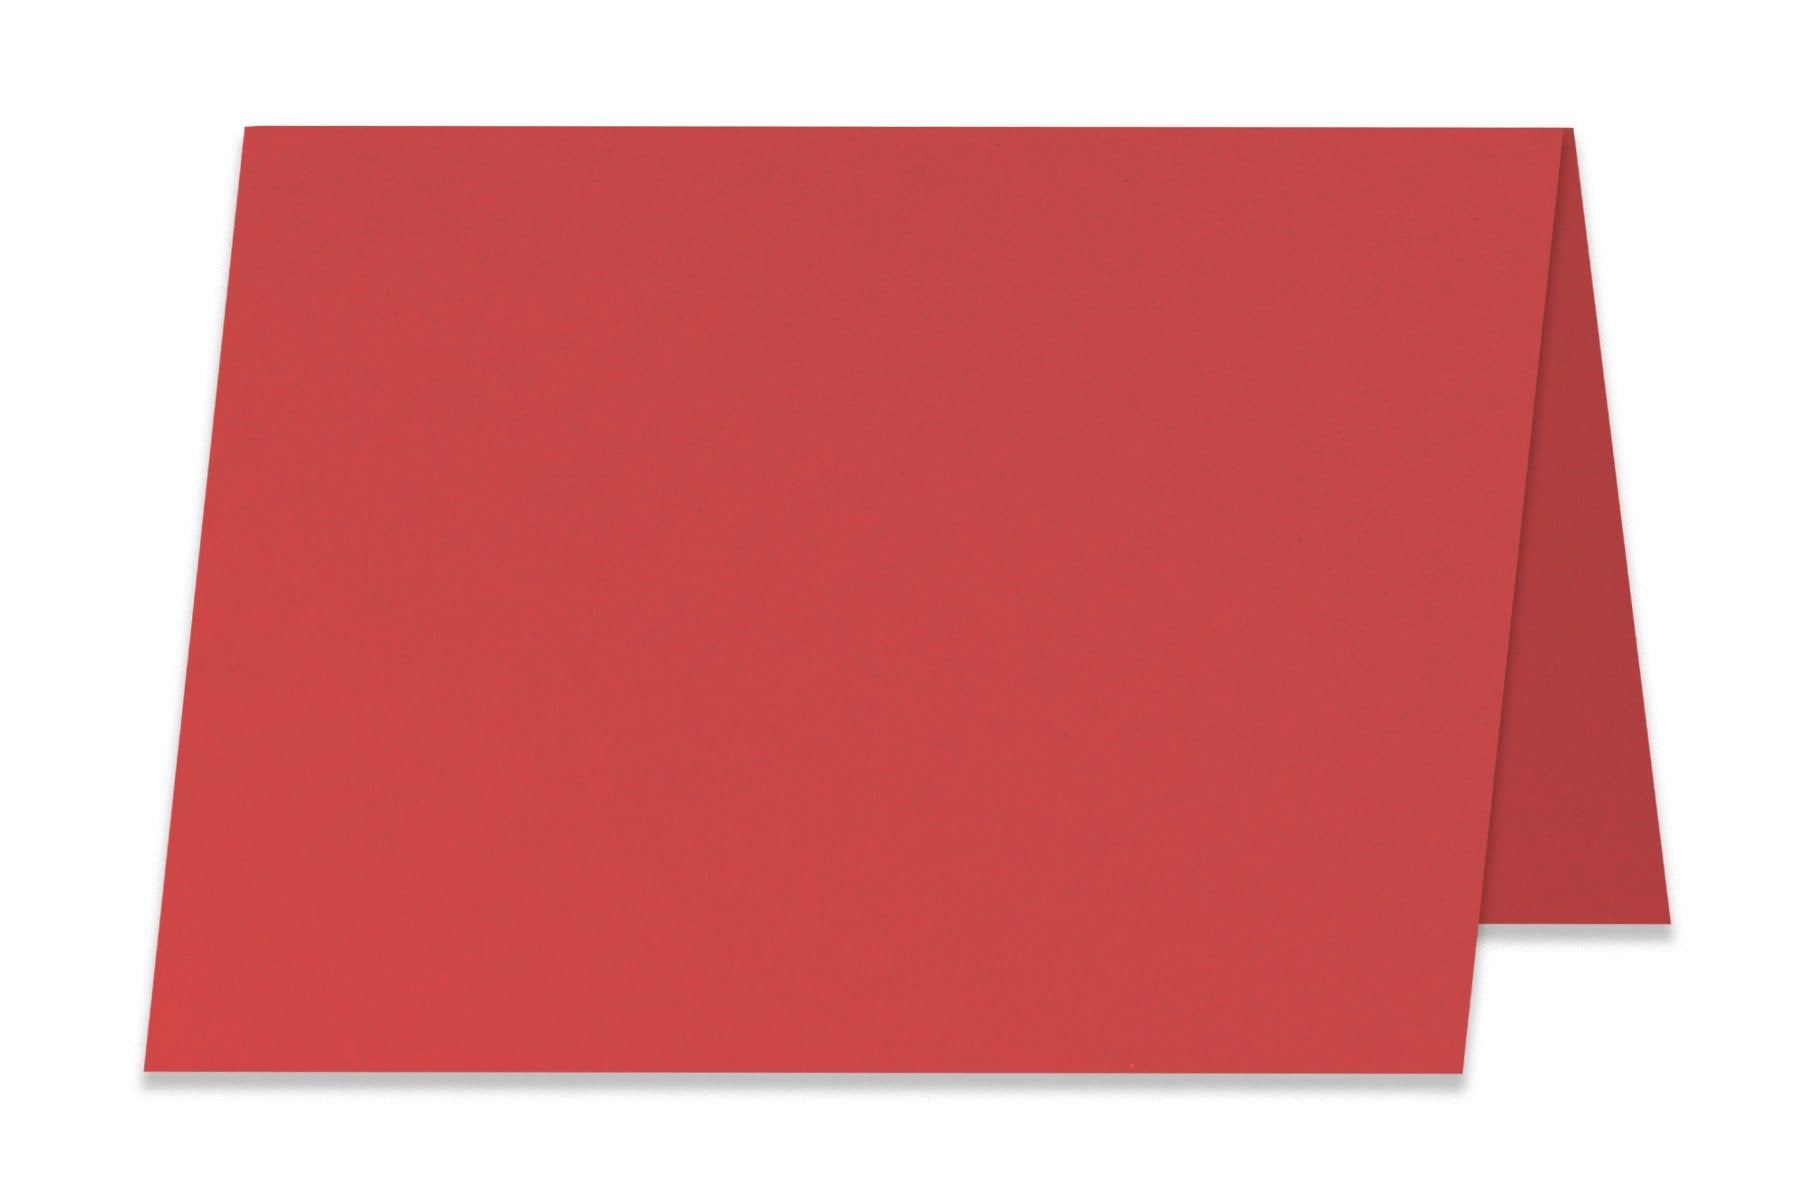 Basic 5x7 Folded Discount Card Stock for DIY cards and Invitations -  CutCardStock